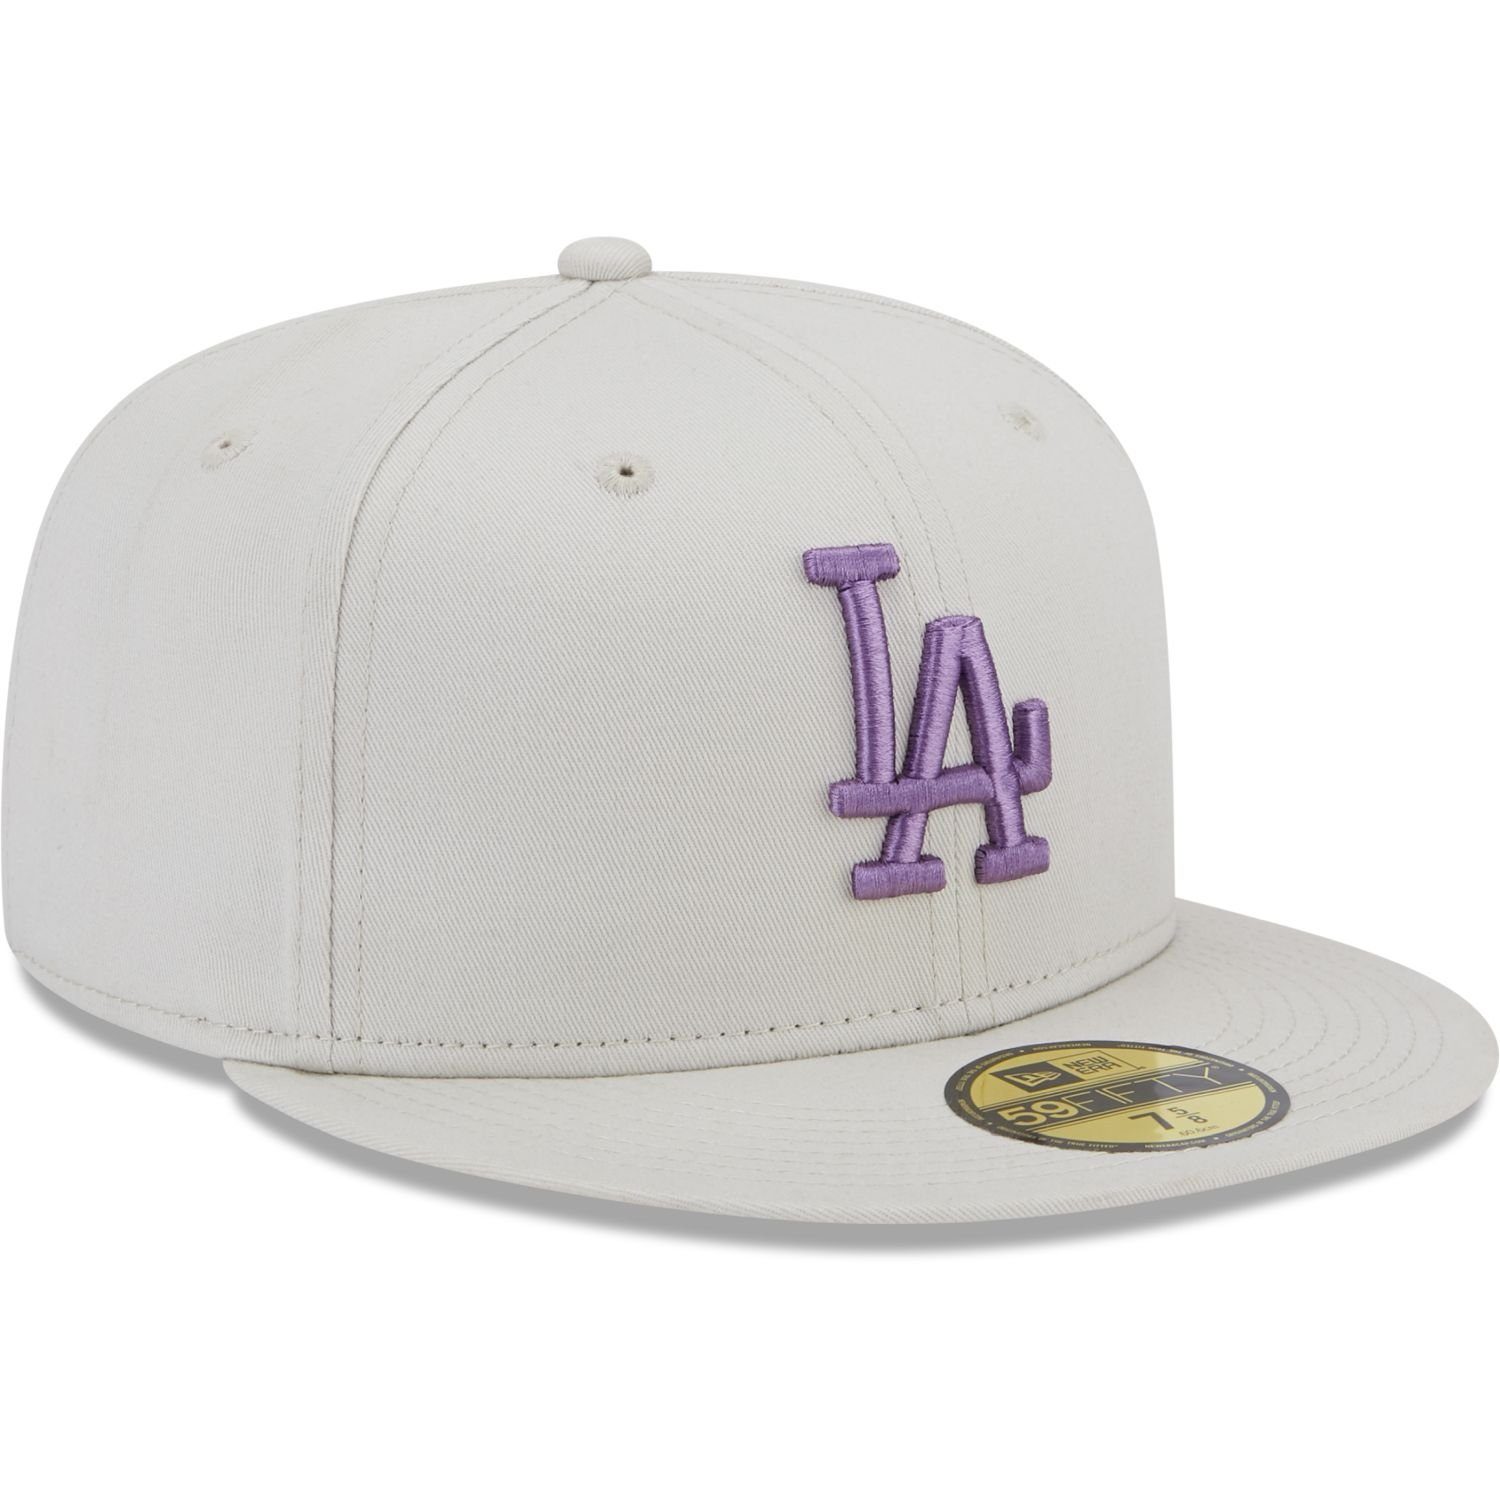 Fitted New Cap Era 59Fifty Los Dodgers Angeles